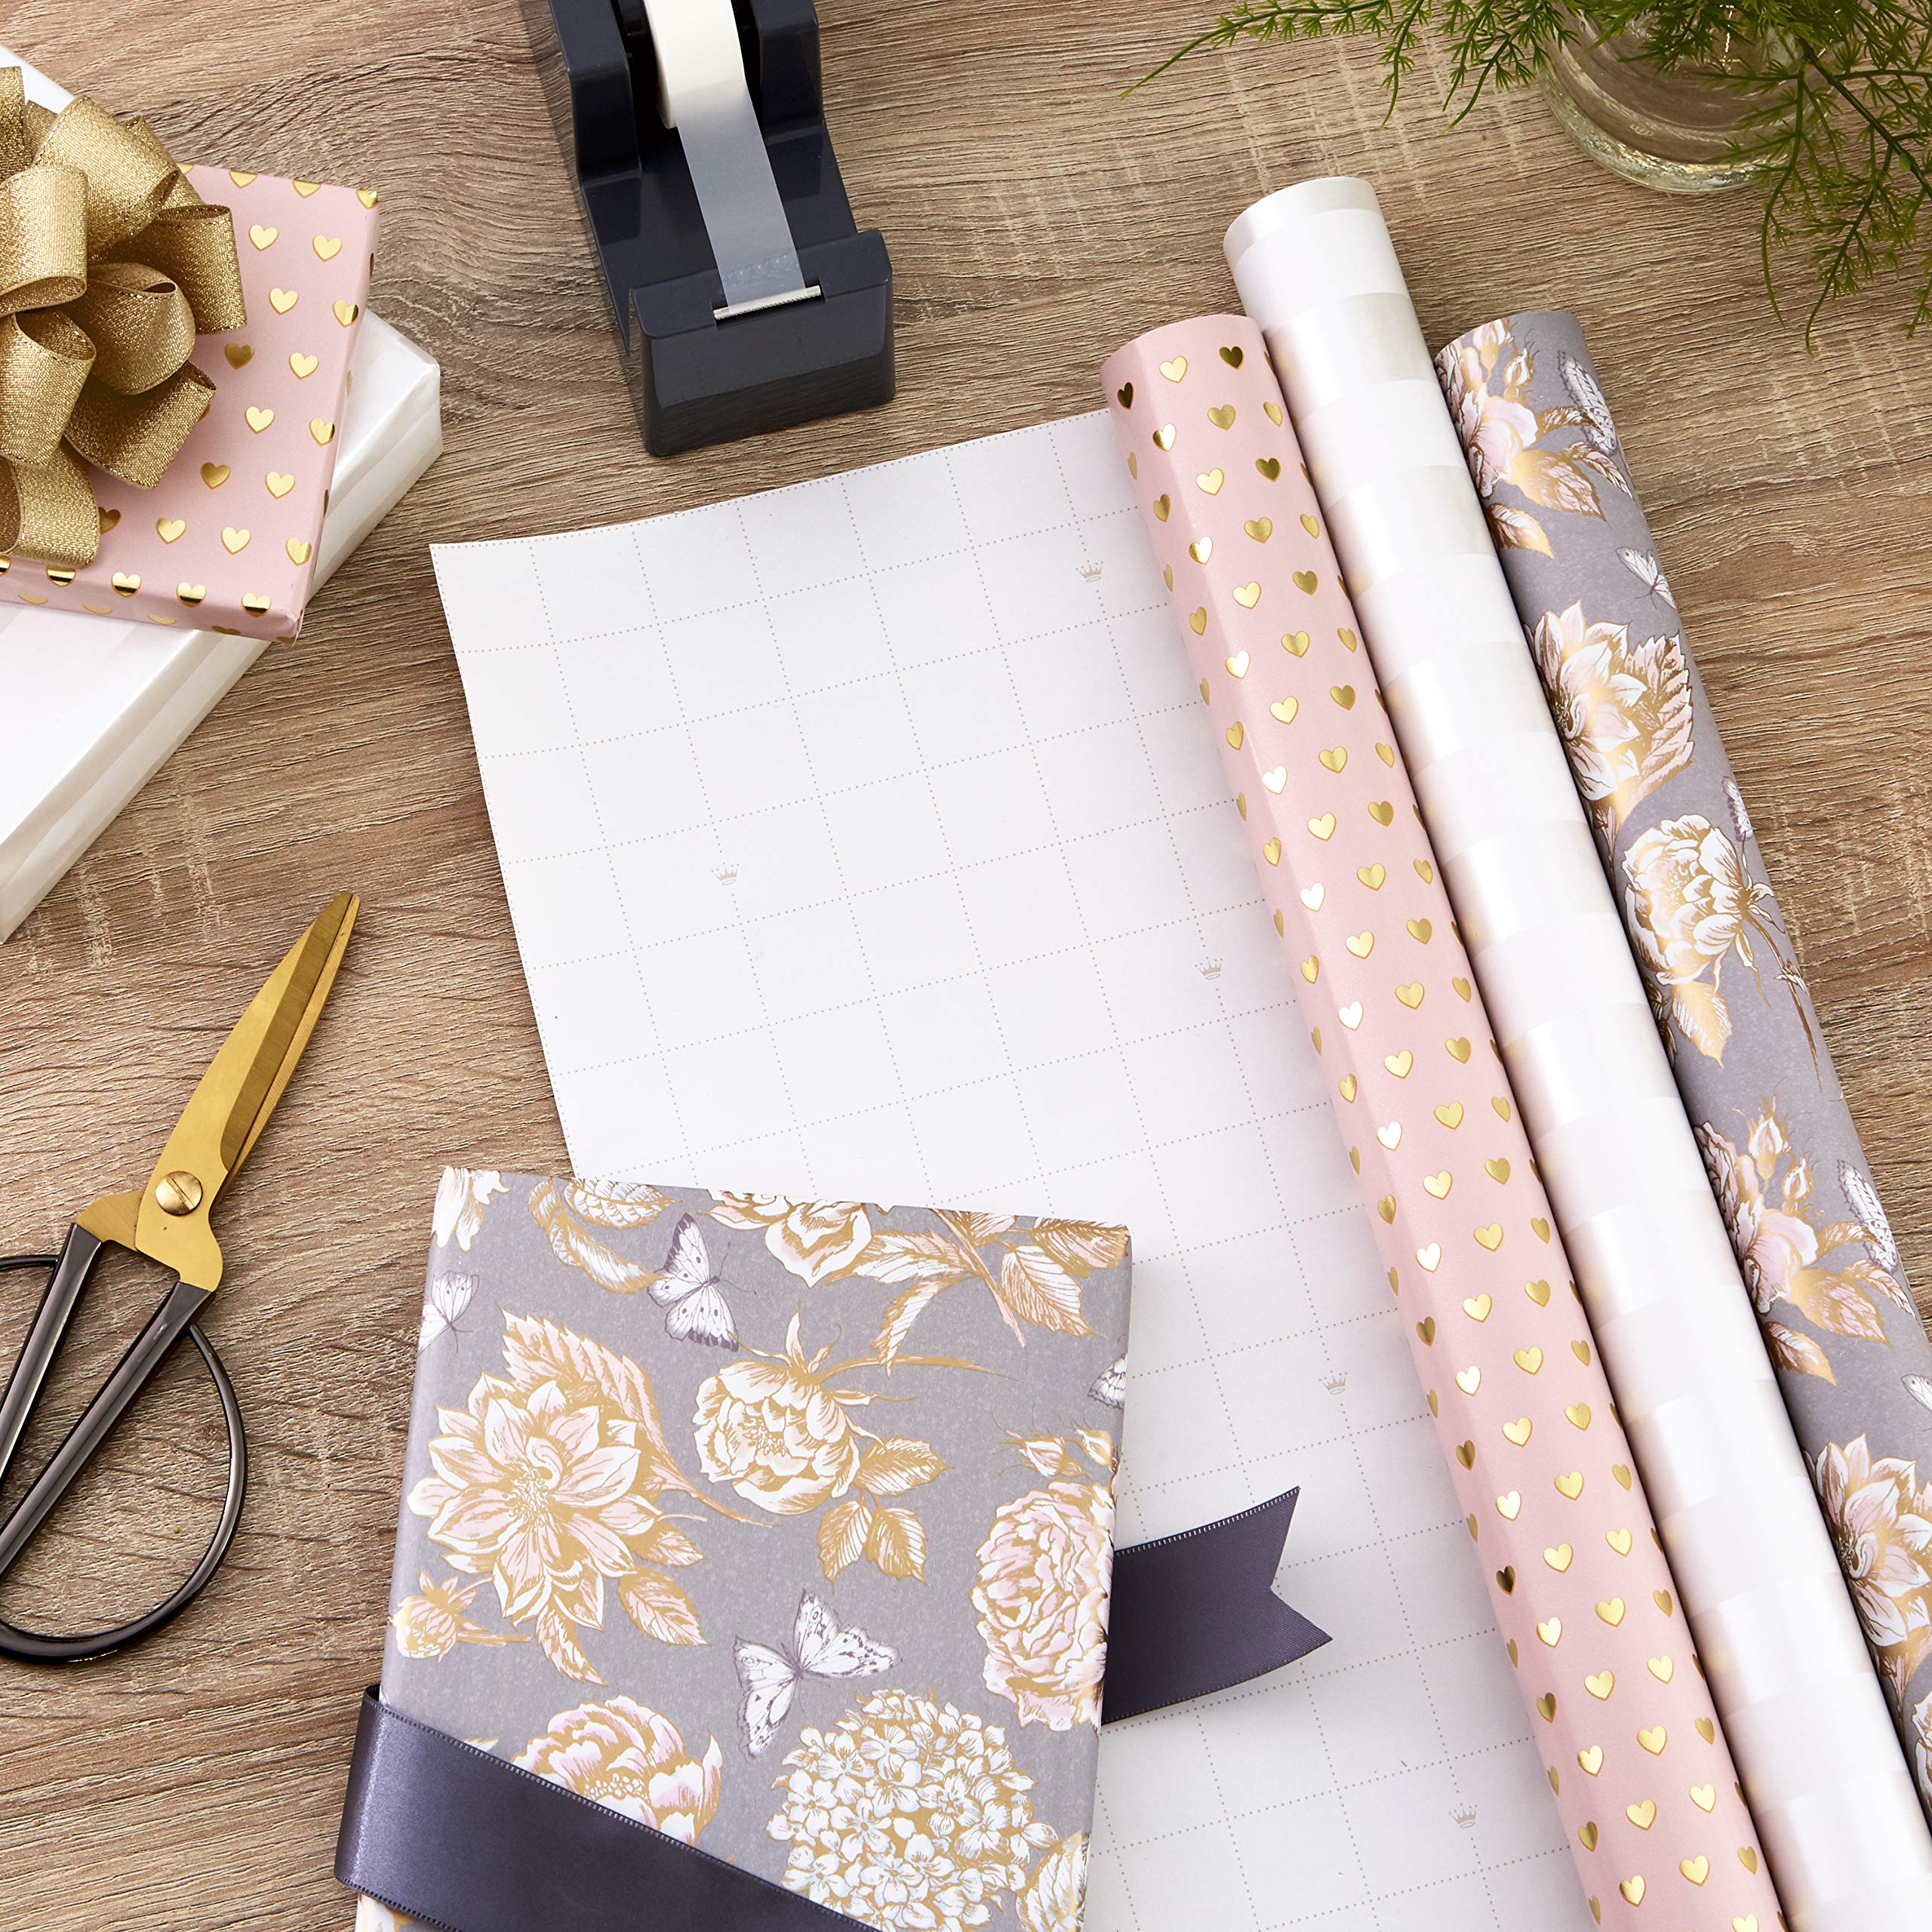 Hallmark Premium Wrapping Paper with Cut Lines on Reverse - Gold Hearts, Rose Flowers, White Stripes (3-Pack: 85 sq. ft. ttl) for Birthdays, Weddings, Mother's Day, Valentine's Day, Bridal Showers